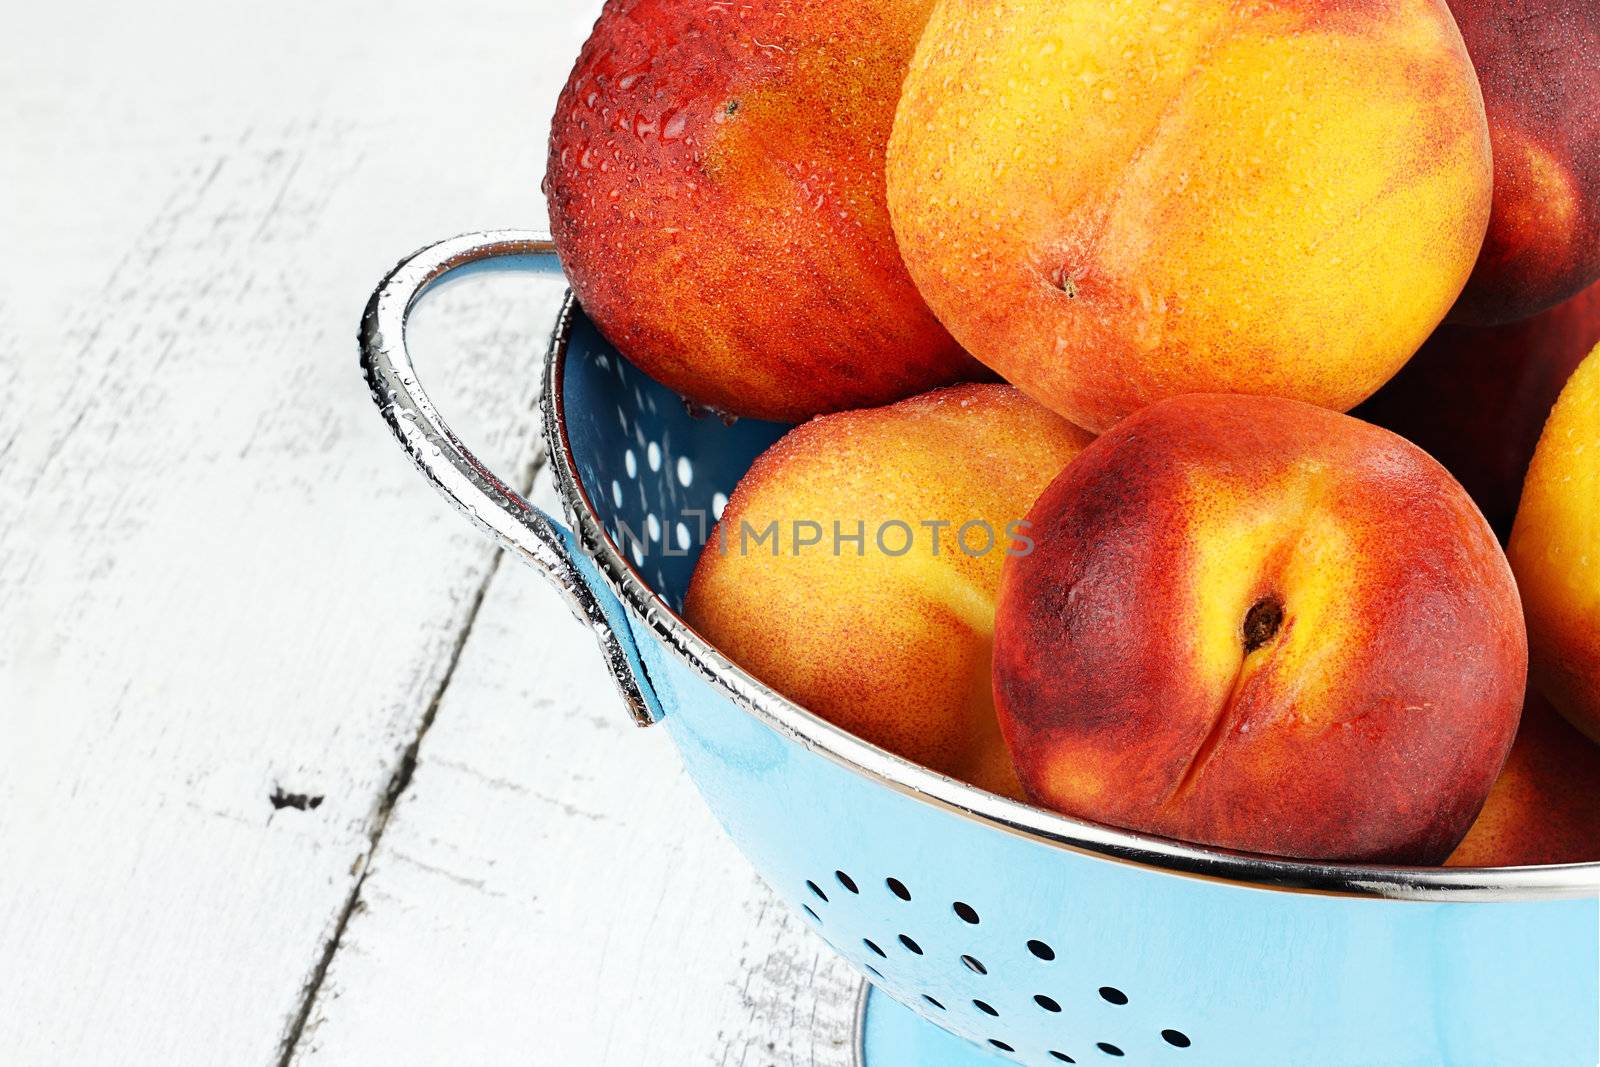 Blue colander filled with freshly washed peaches over a rustic background.
